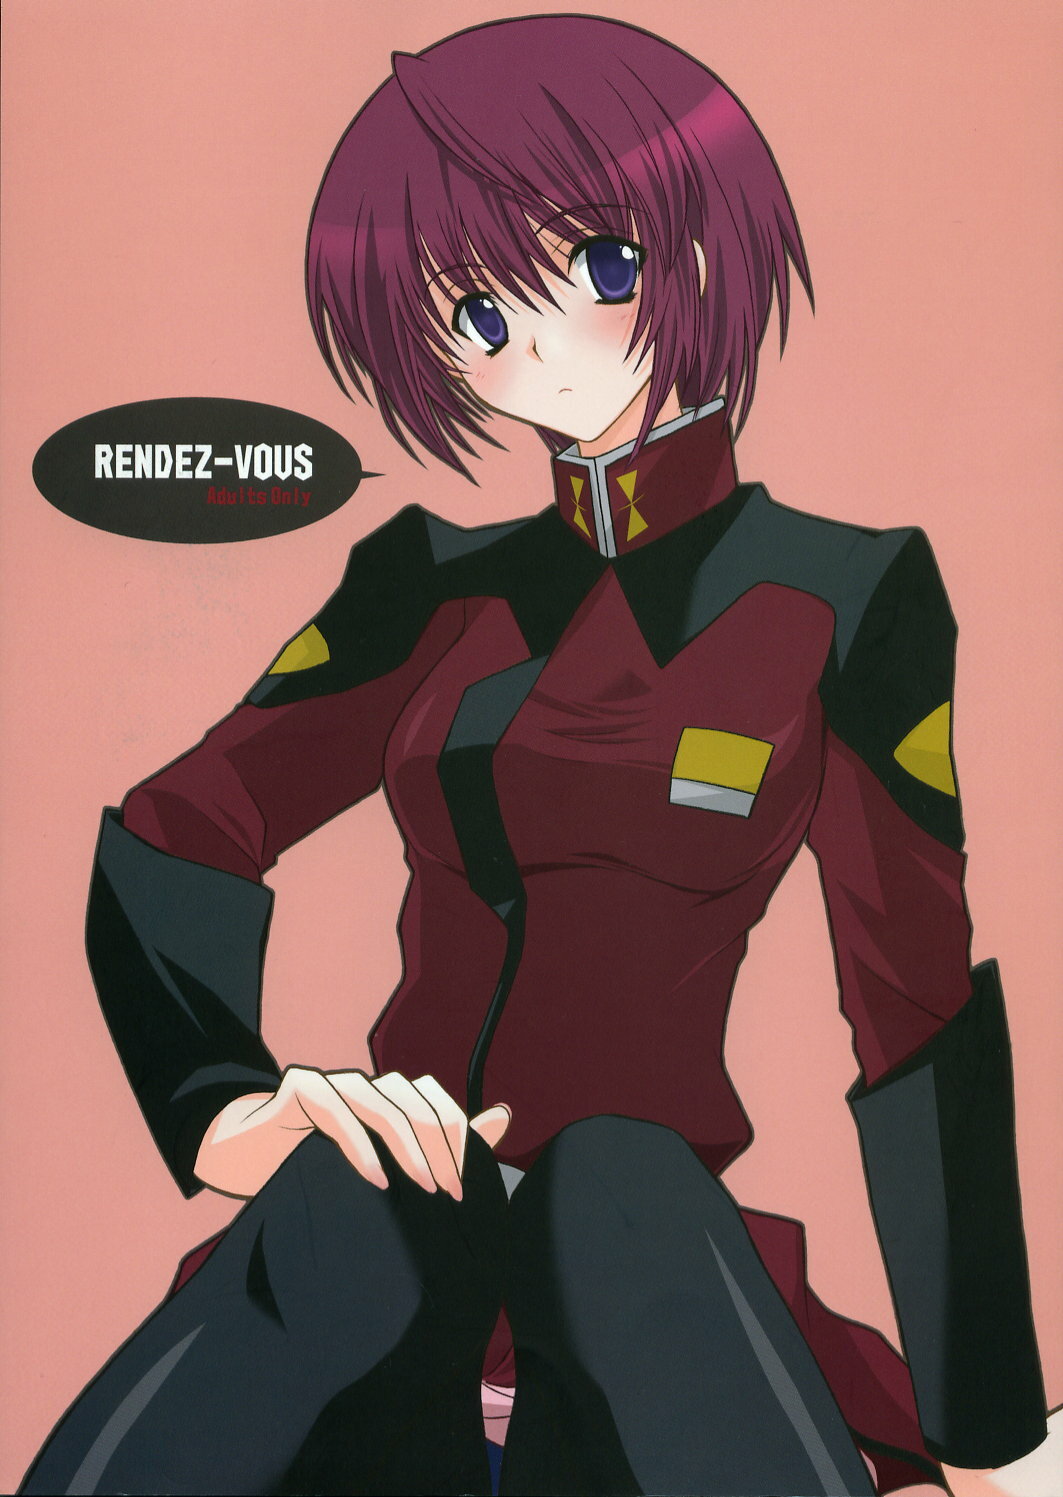 (SC28) [YLANG-YLANG (Ichie Ryouko)] RENDEZ-VOUS (Mobile Suit Gundam SEED DESTINY) page 1 full